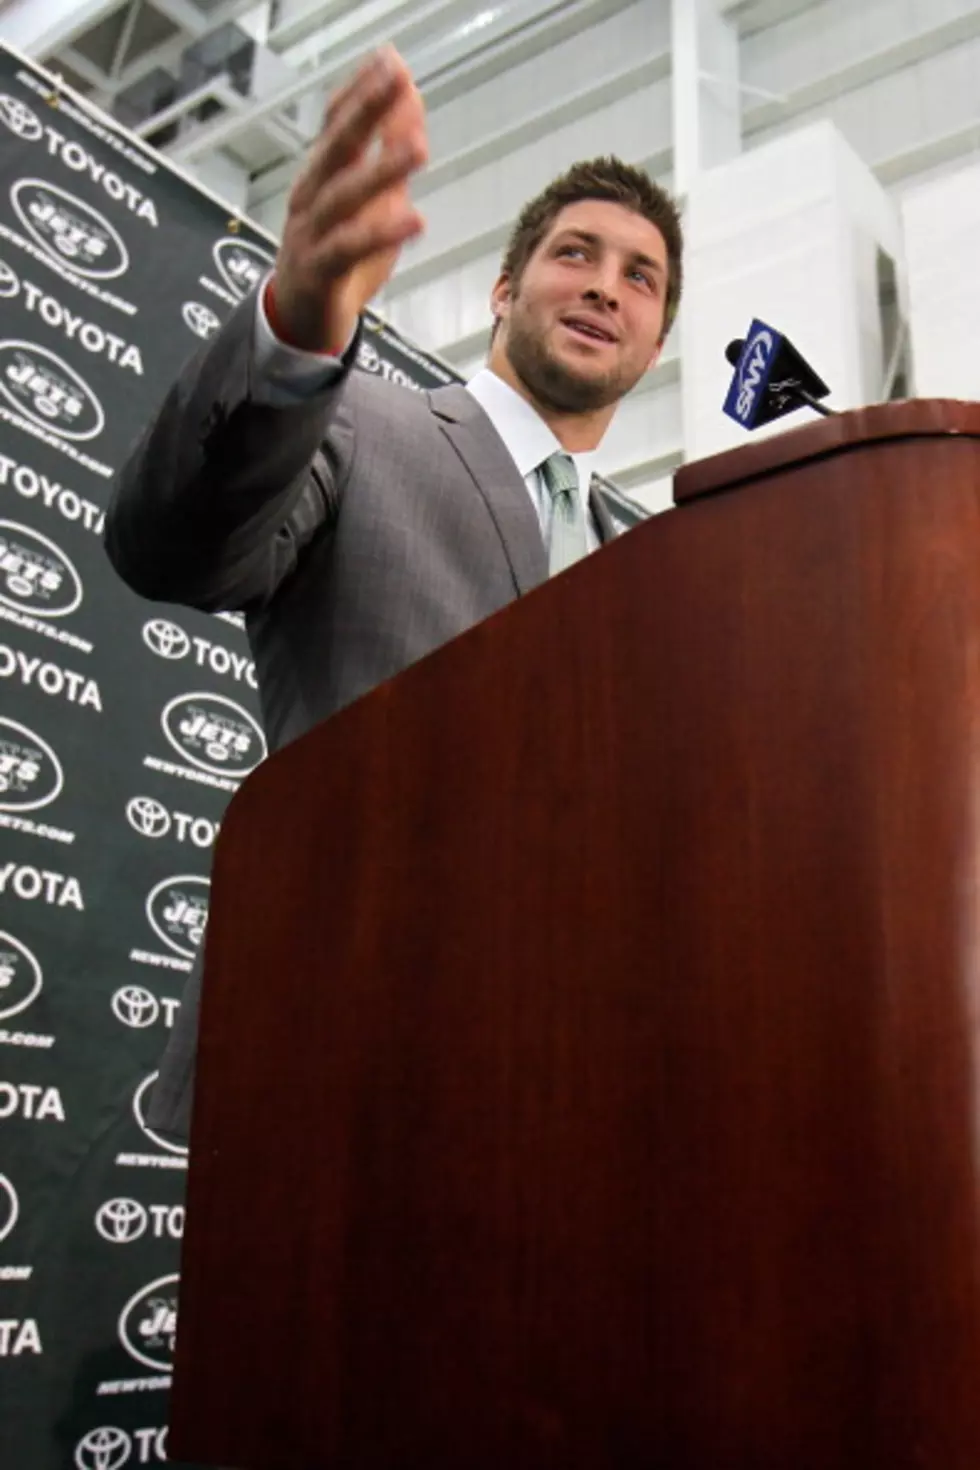 Why Do People Like Tim Tebow So Much? Chris Allen Offers His Two Cents